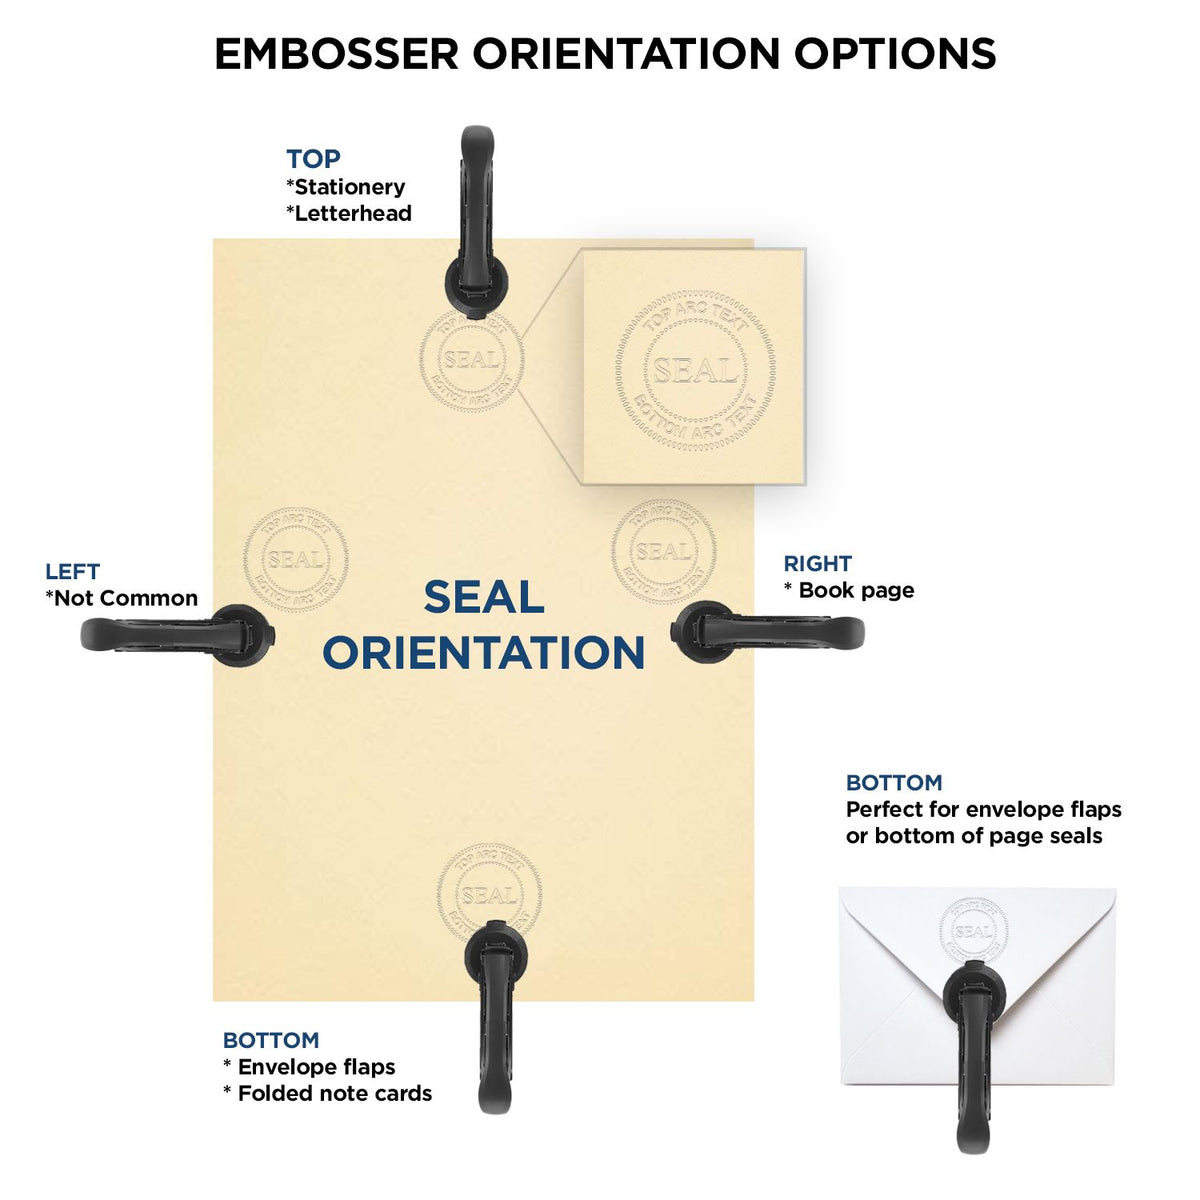 An infographic for the Long Reach North Dakota PE Seal showing embosser orientation, this is showing examples of a top, bottom, right and left insert.